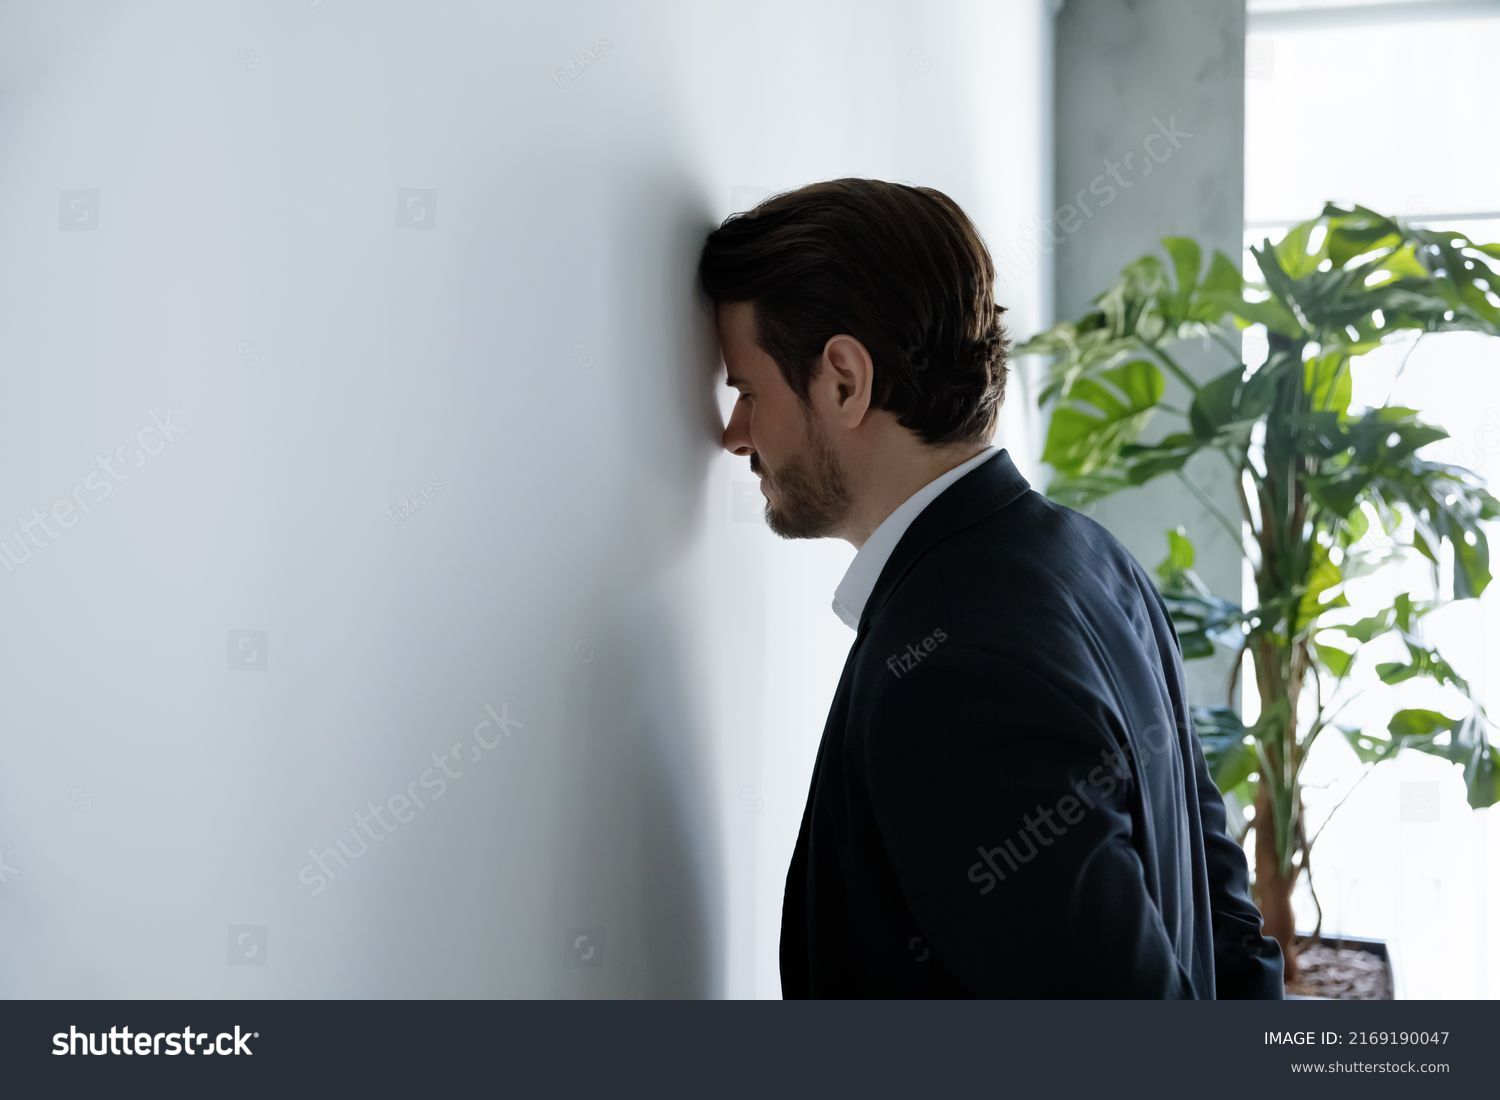 Upset businessman banging his head against wall in despair looks stressed having problems at work, bankruptcy, business failure unsuccessful negotiations, project loss, failed job interview concept #2169190047